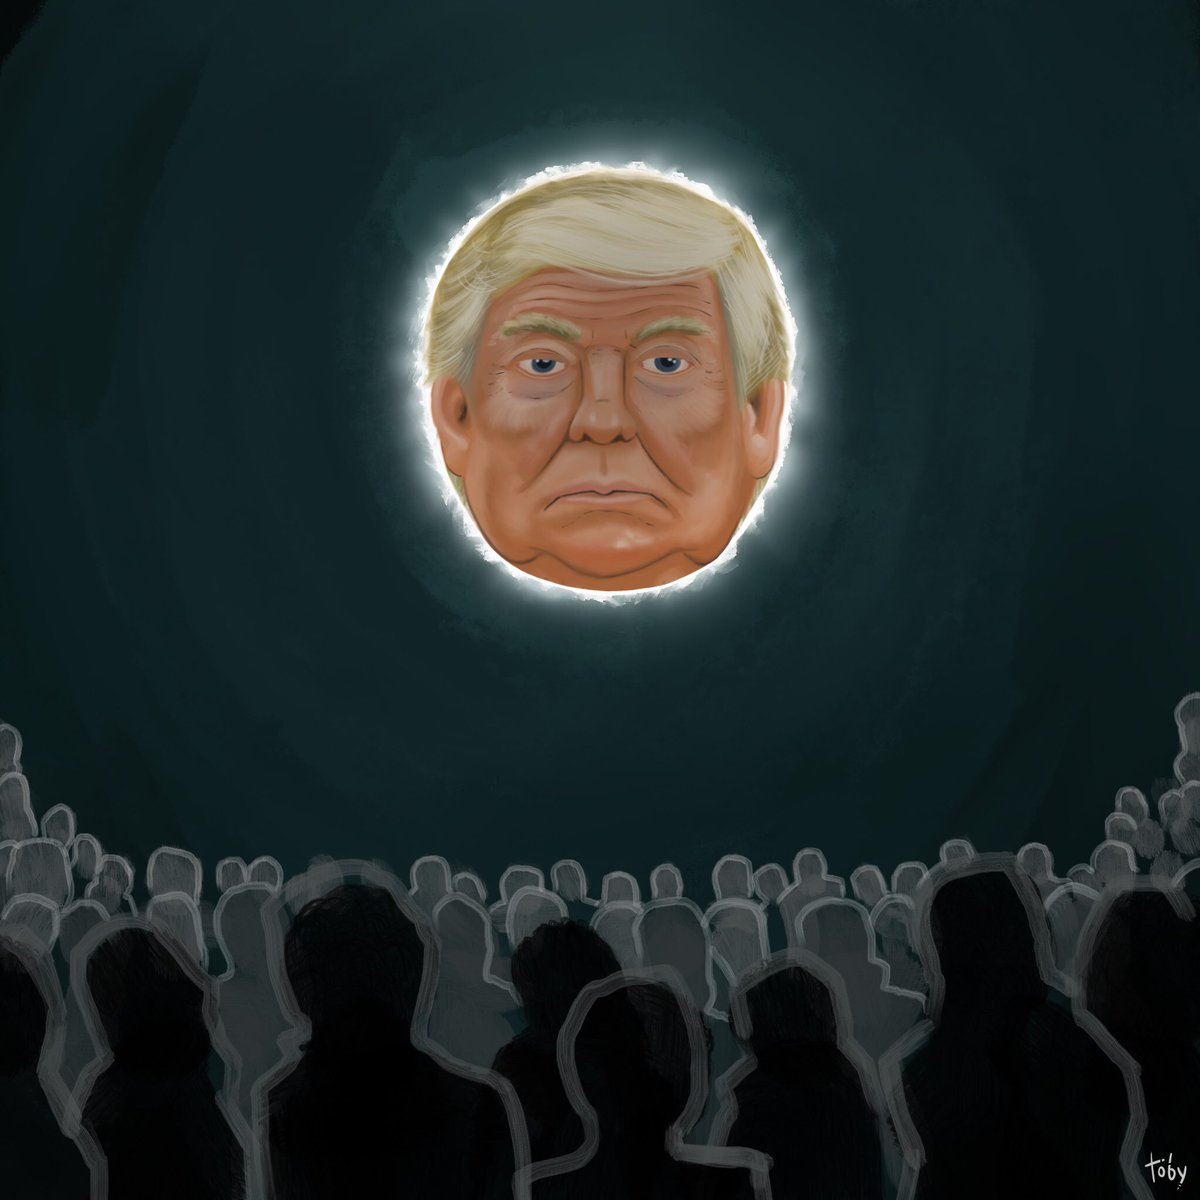 Next #Eclipse coming on 5 November 2024. Ugggghhhh… #Eclipse2024 #EclipseSolar #Elections2024